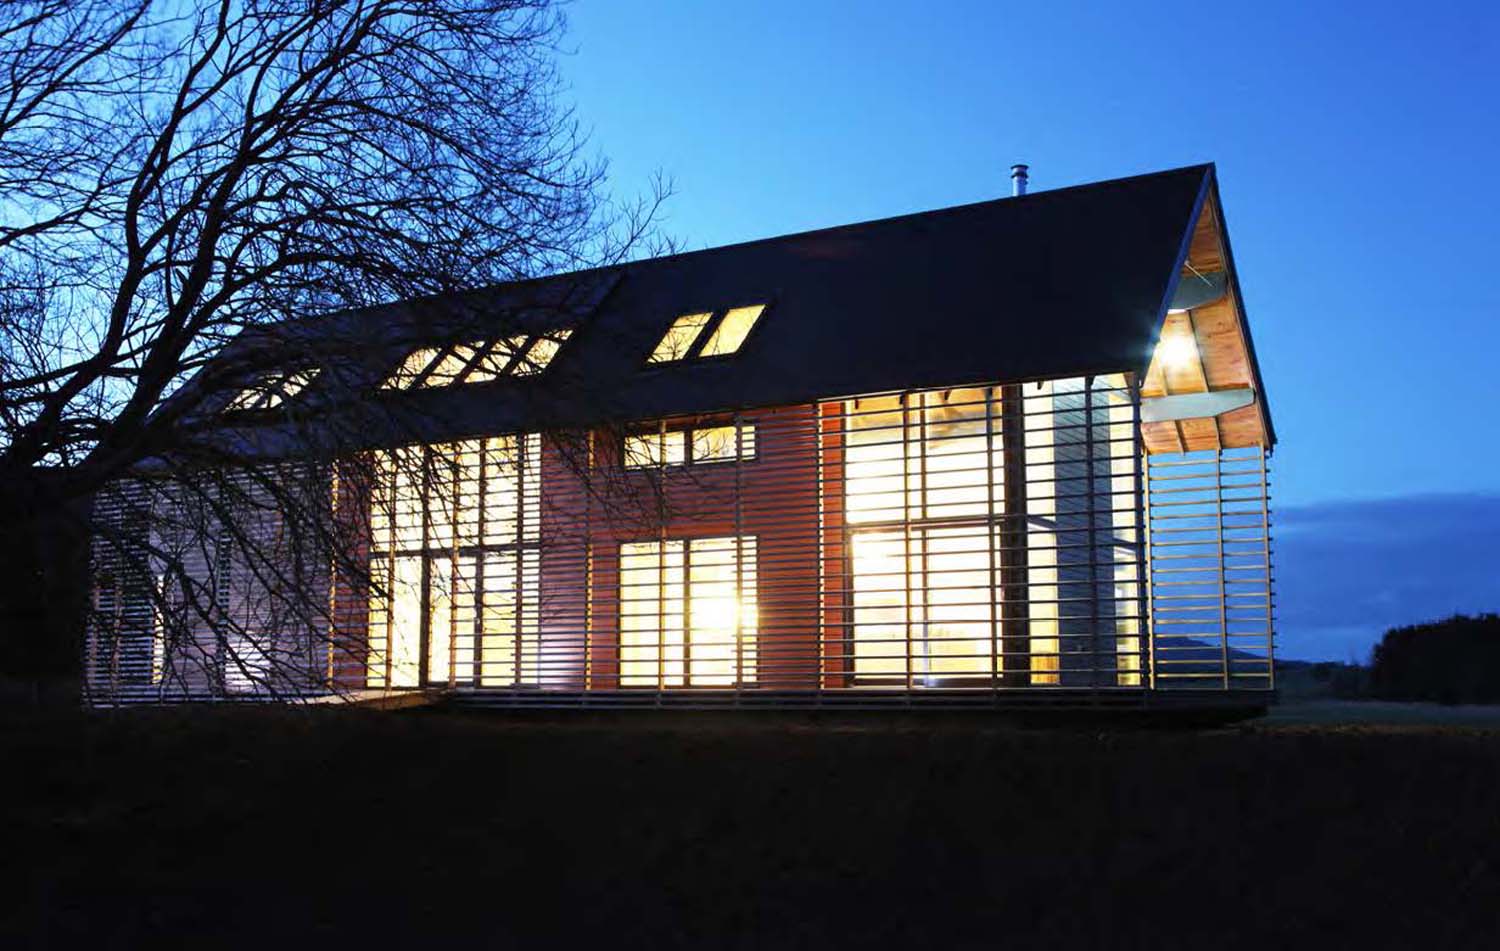 A photograph of  large timber building at nighttime showing light coming from the house which is silhouetted against a blue night sky